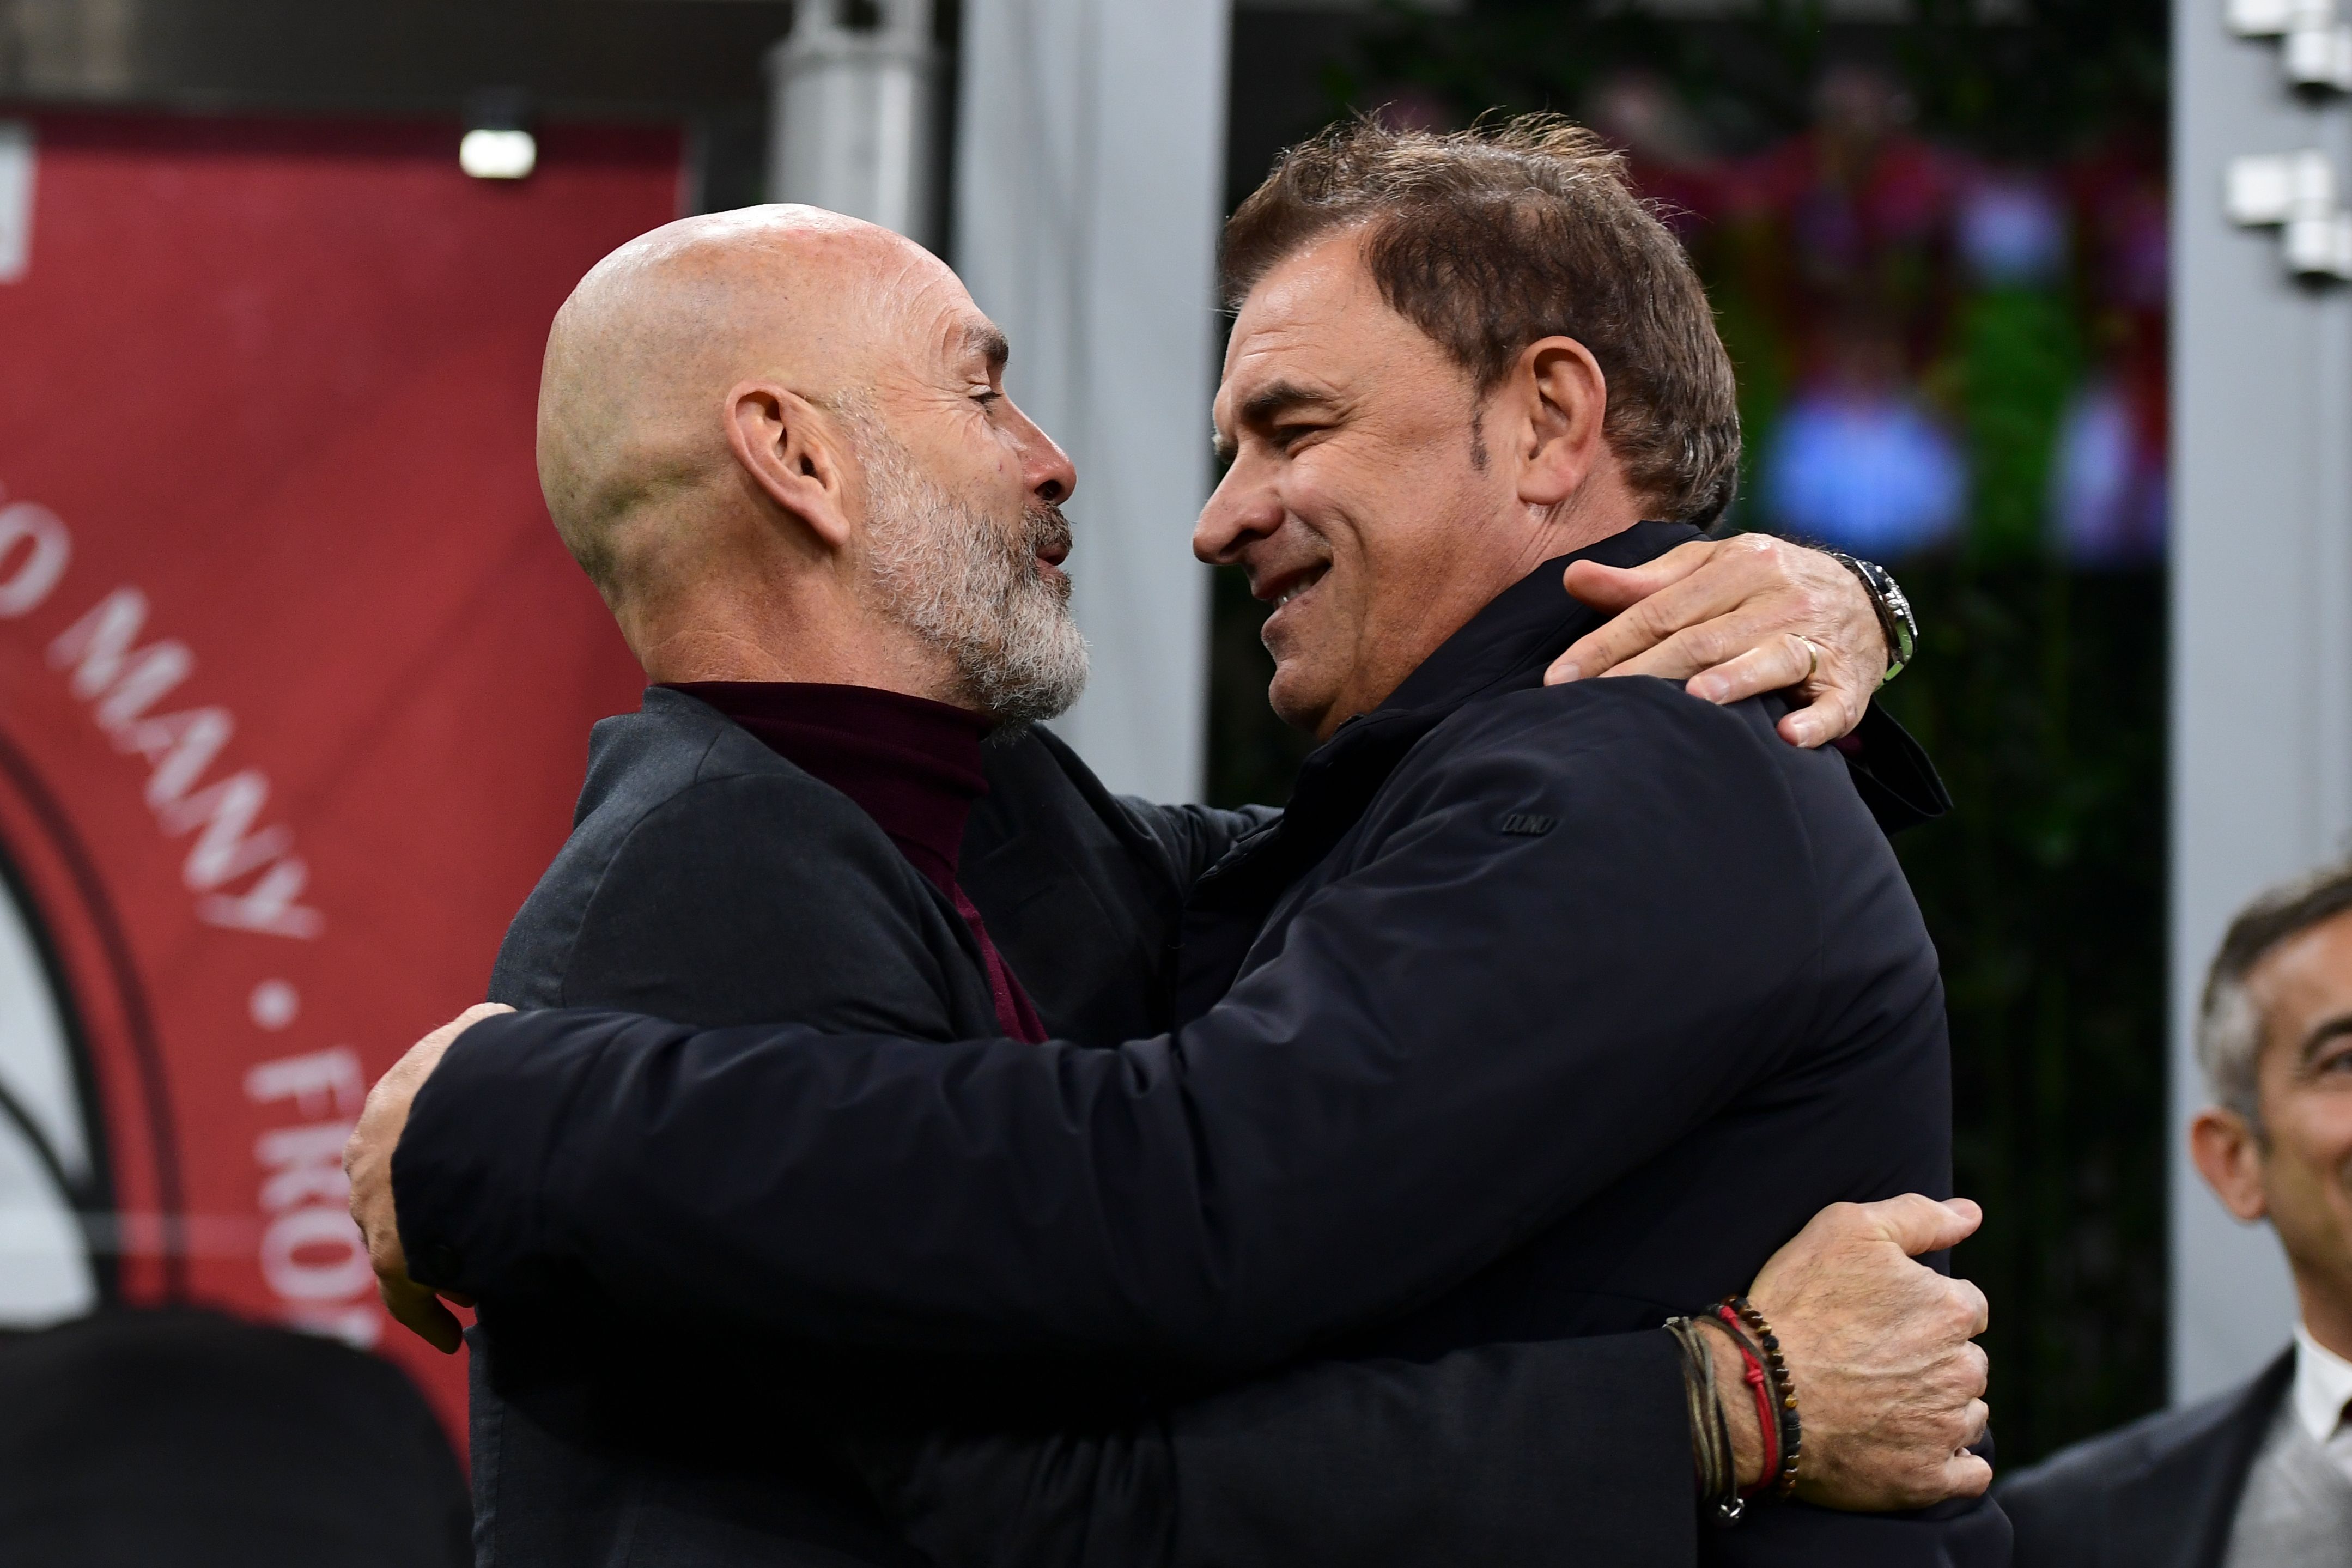 AC Milan's Italian head coach Stefano Pioli (L) salutes Spal's Italian head coach Leonardo Semplici prior to the Italian Serie A football match AC Milan vs Spal on October 31, 2019 at the San Siro stadium in Milan. (Photo by MIGUEL MEDINA / AFP) (Photo by MIGUEL MEDINA/AFP via Getty Images)